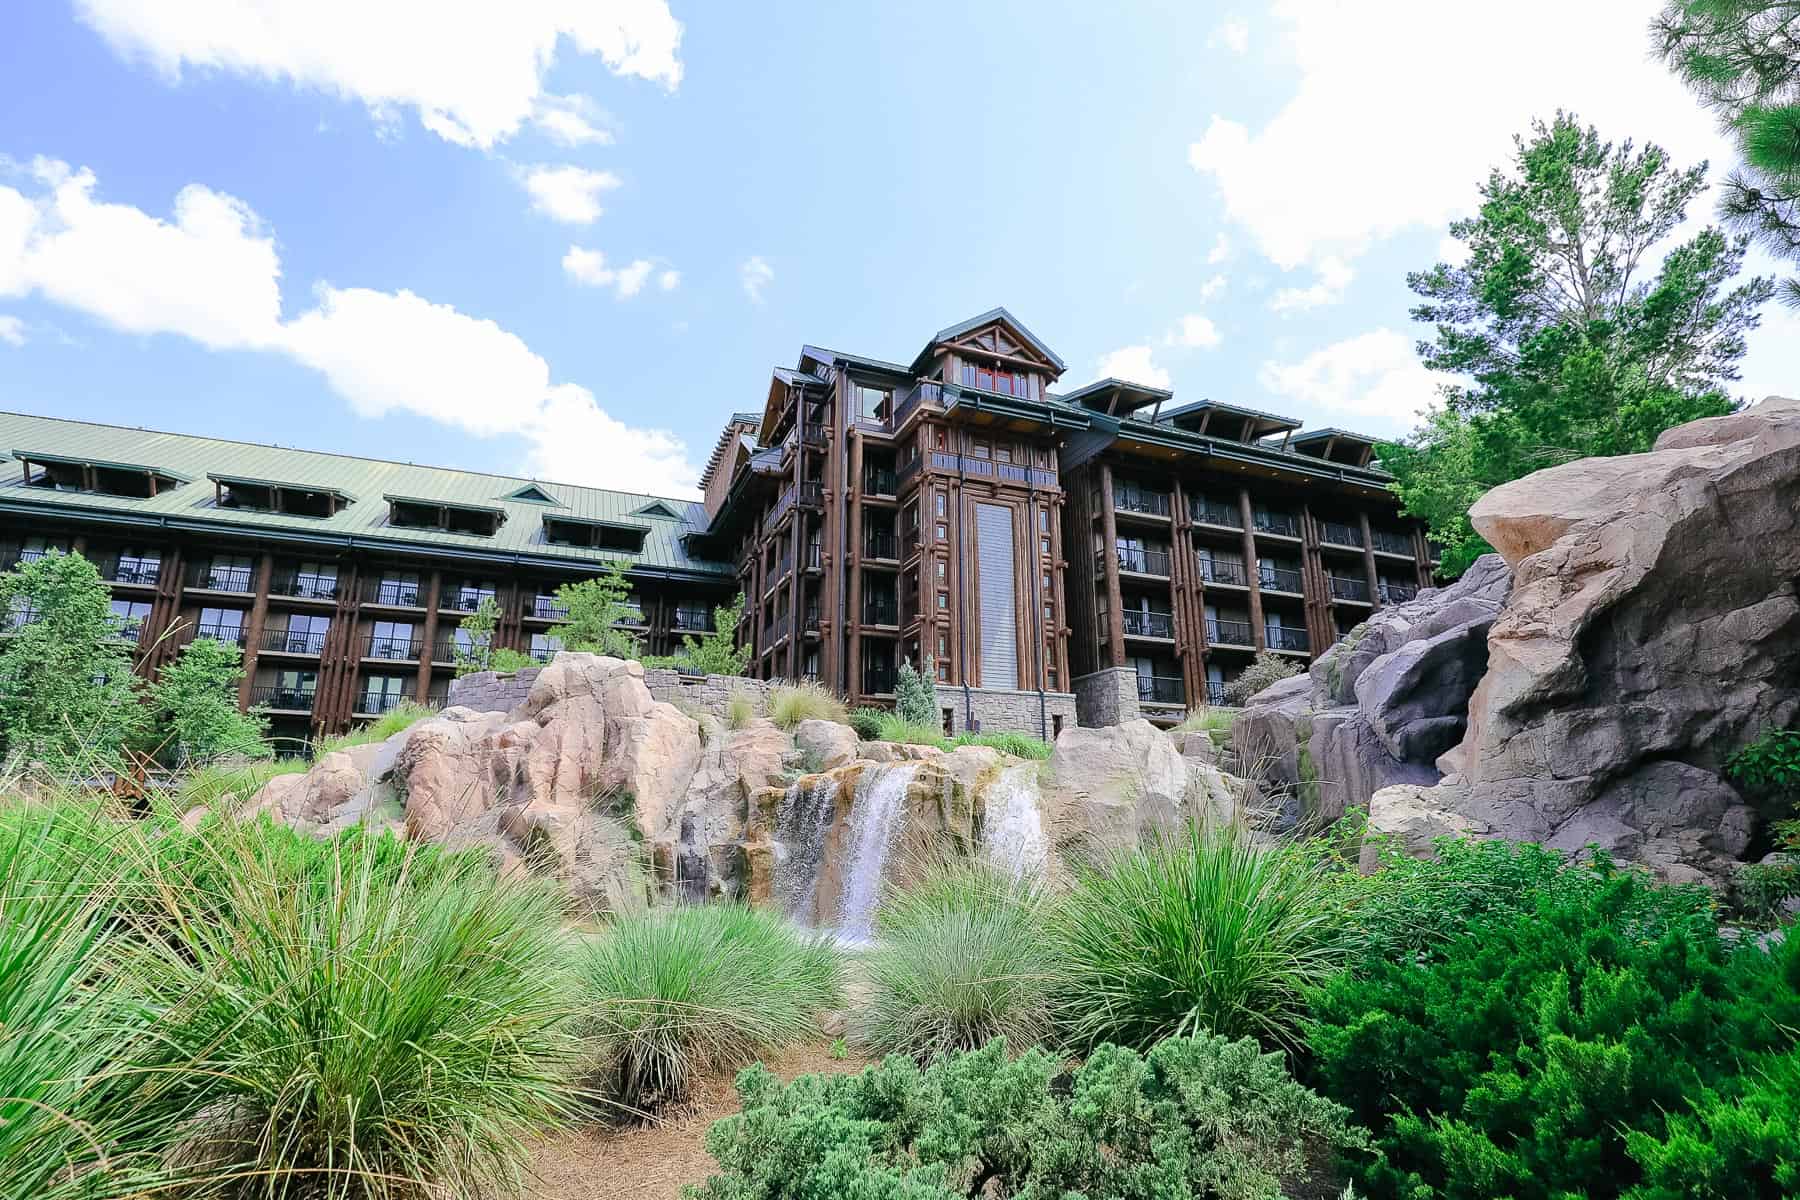 Disney's Wilderness Lodge with the waterfall in front of it